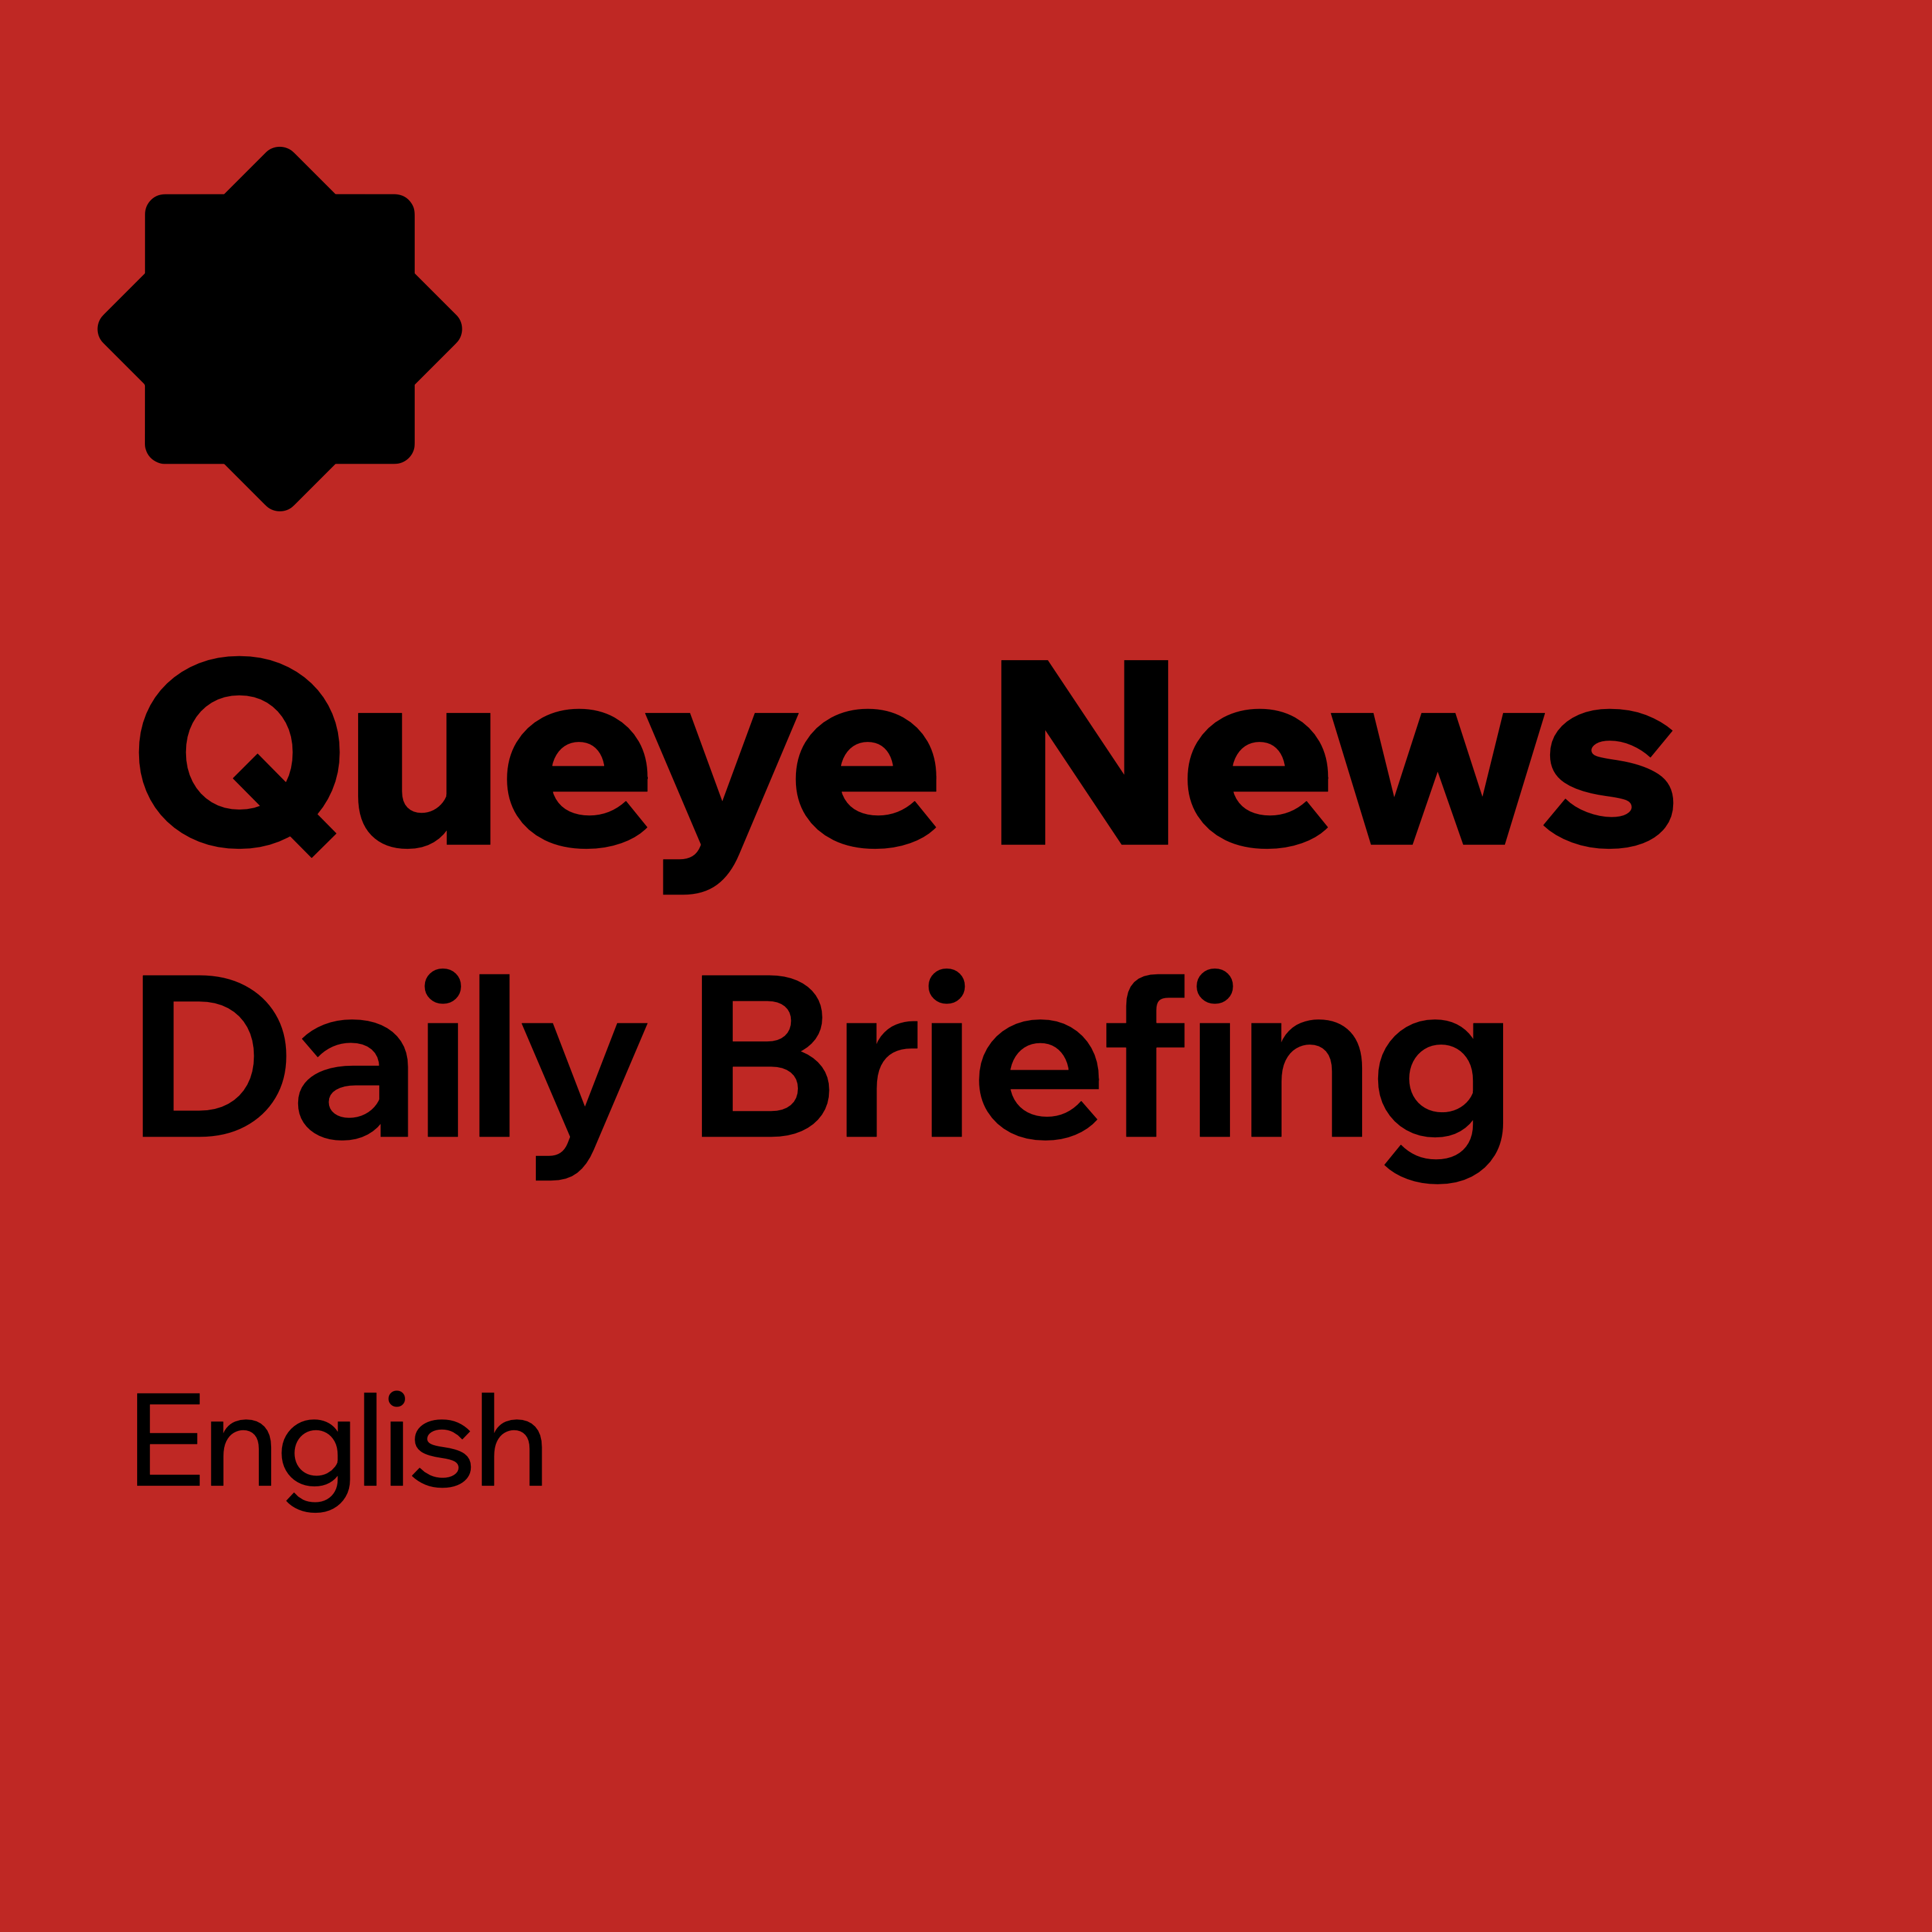 Queye News now has new ways to stay on top of news